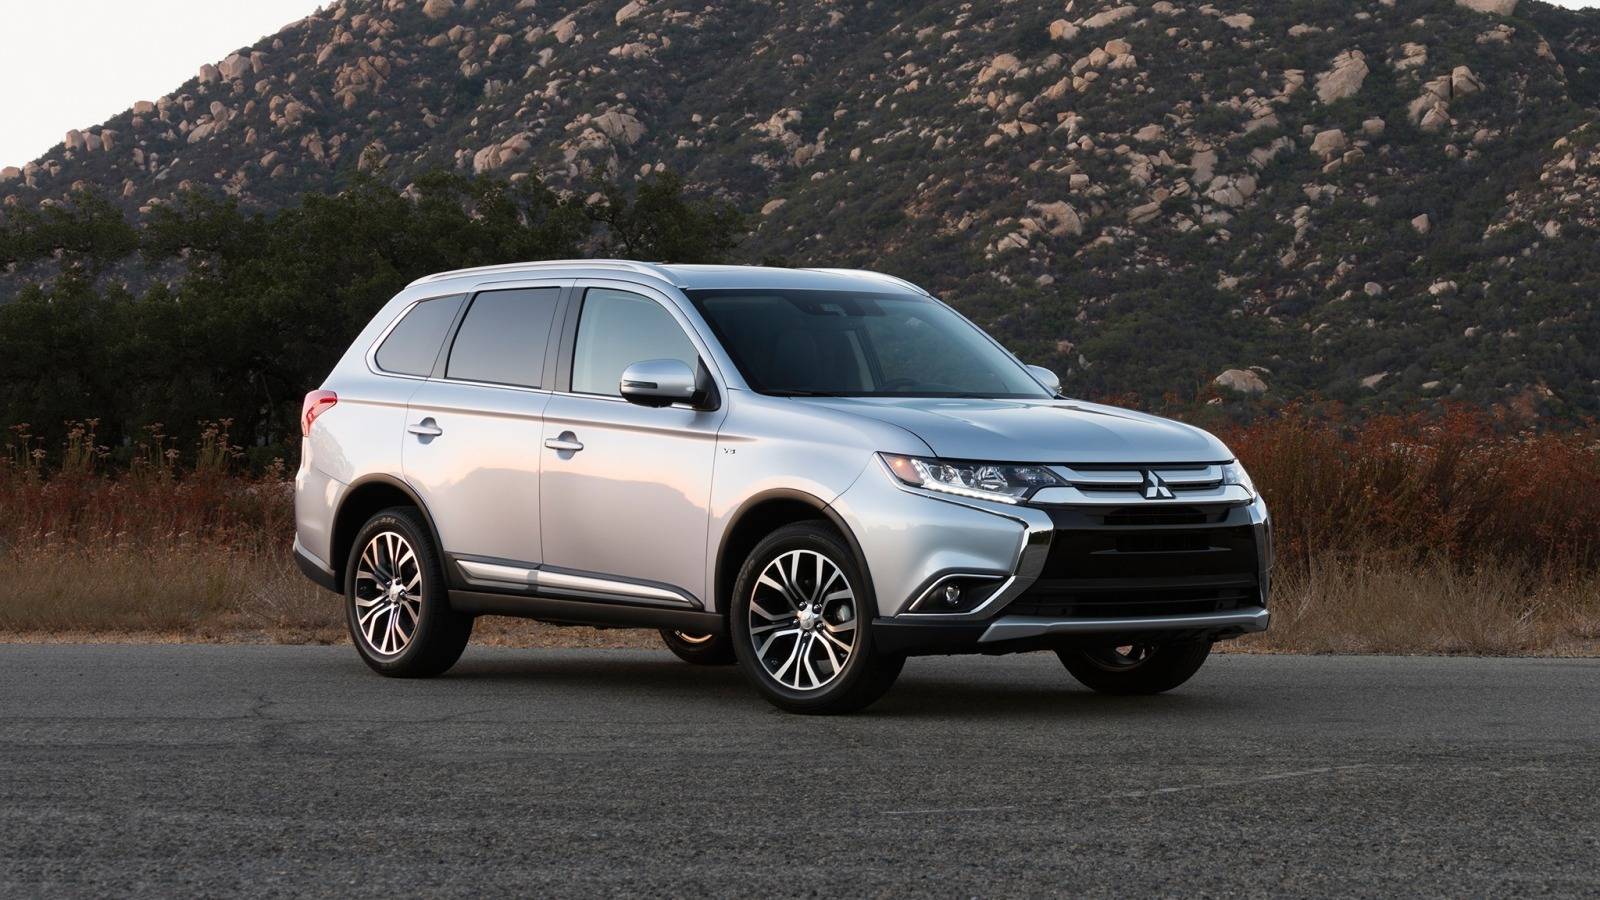 Mitsubishi Outlander Pricing, Features, Ratings and Reviews